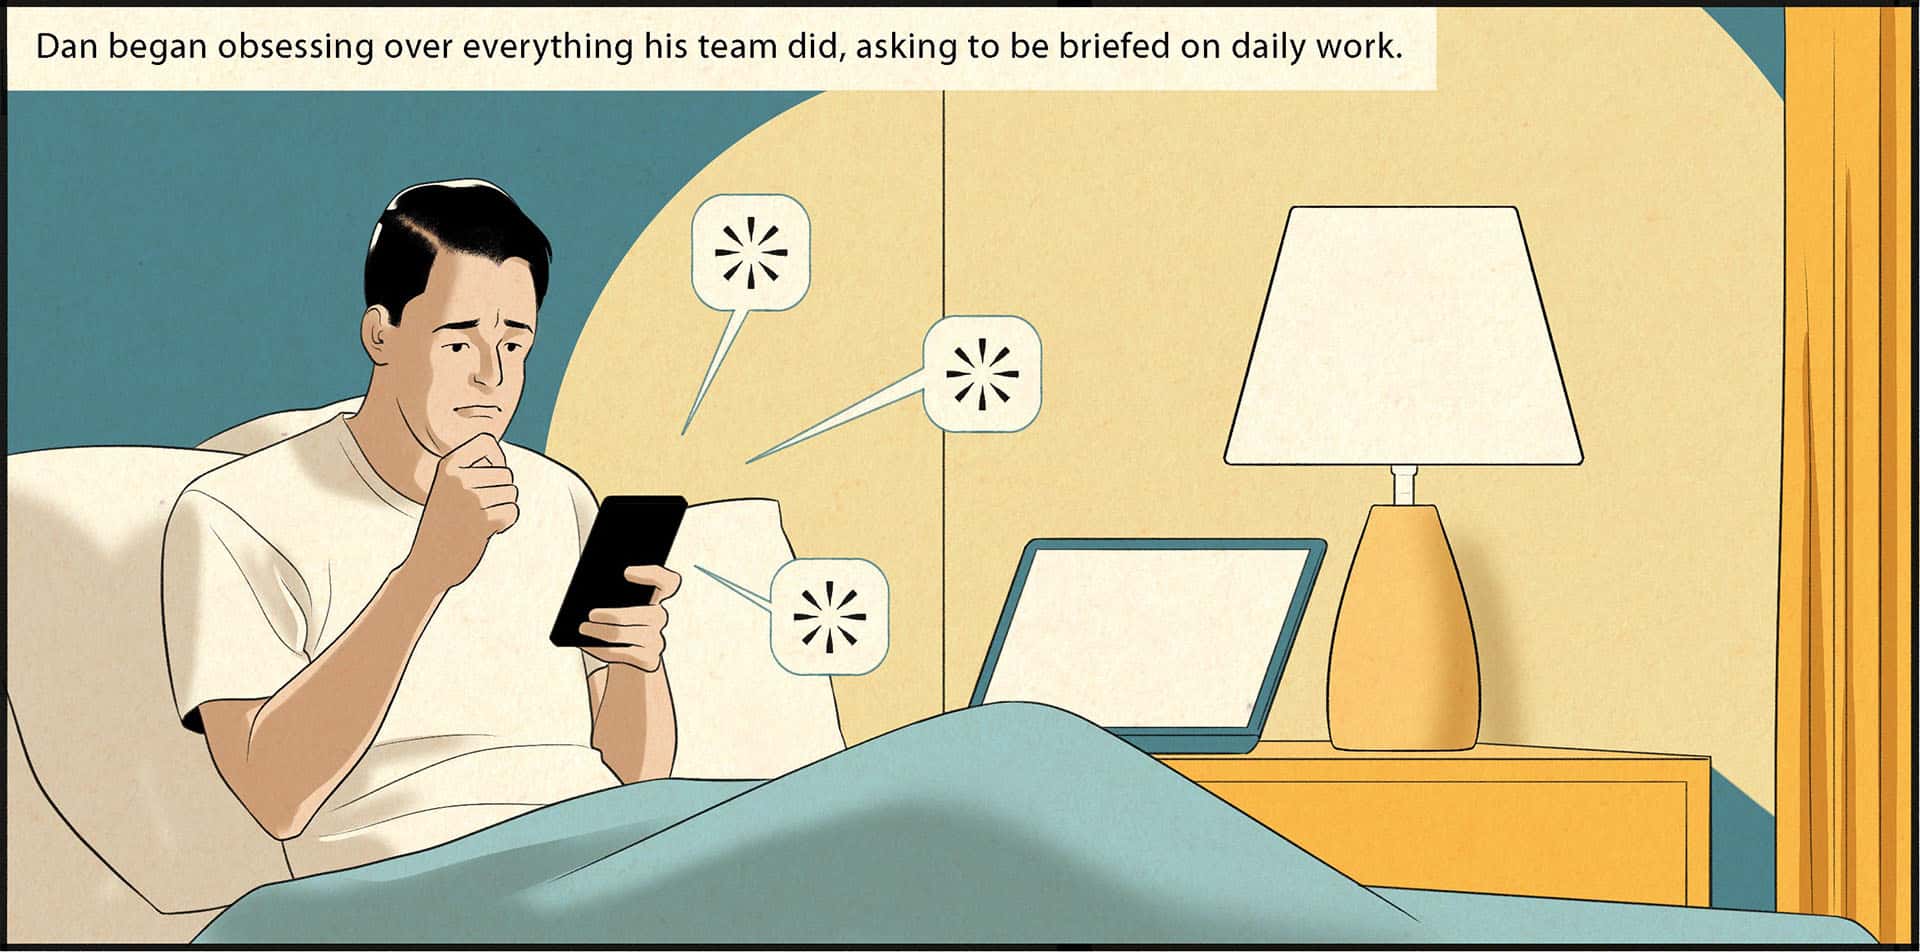 Dan is sitting up in bed with his laptop open on the nightstand and his phone in his hand. The phone is showing multiple messages being sent. The caption reads, Dan began obsessing over everything his team did, asking to be briefed on daily work.